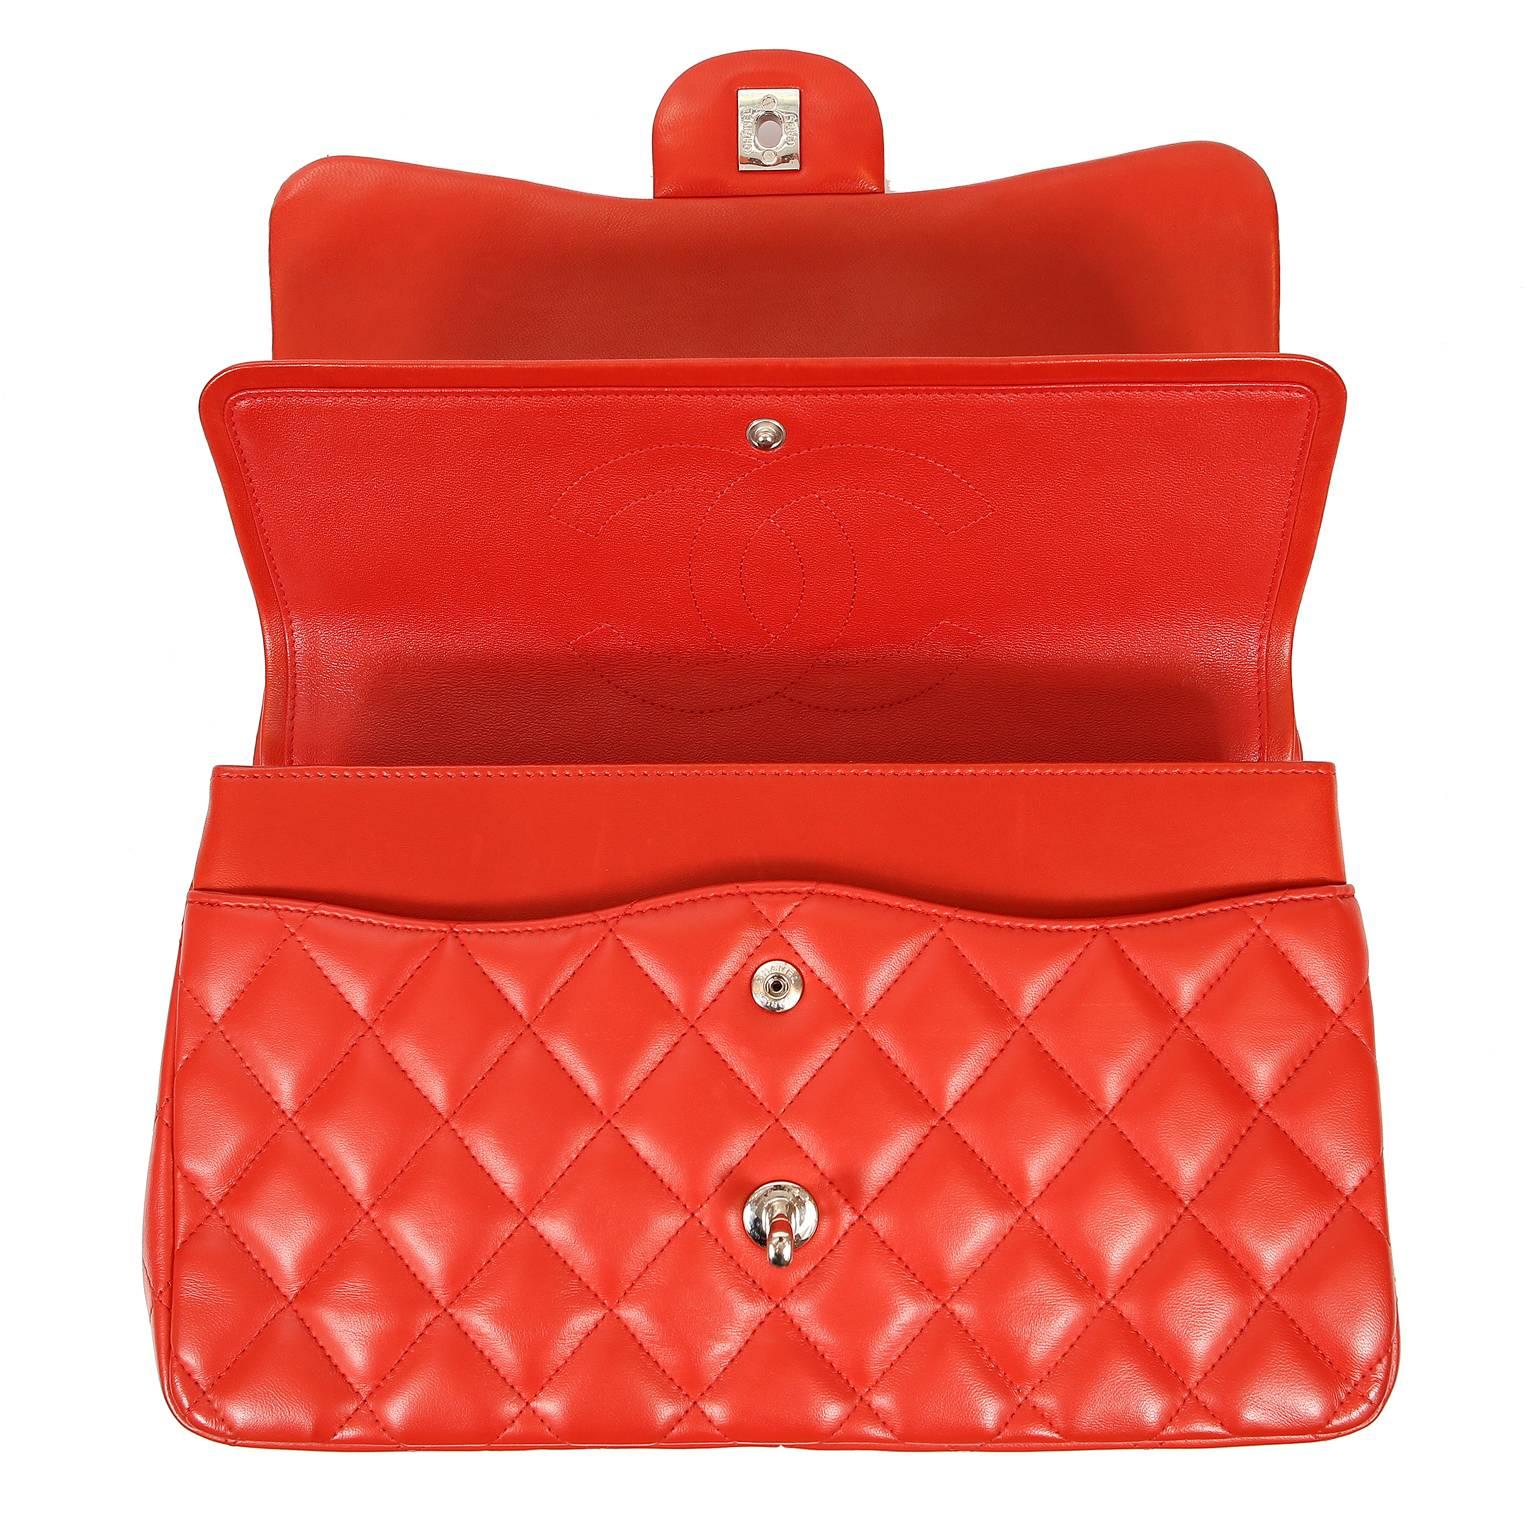 Chanel Red Lambskin Jumbo Classic Double Flap Bag with Silver HW 2